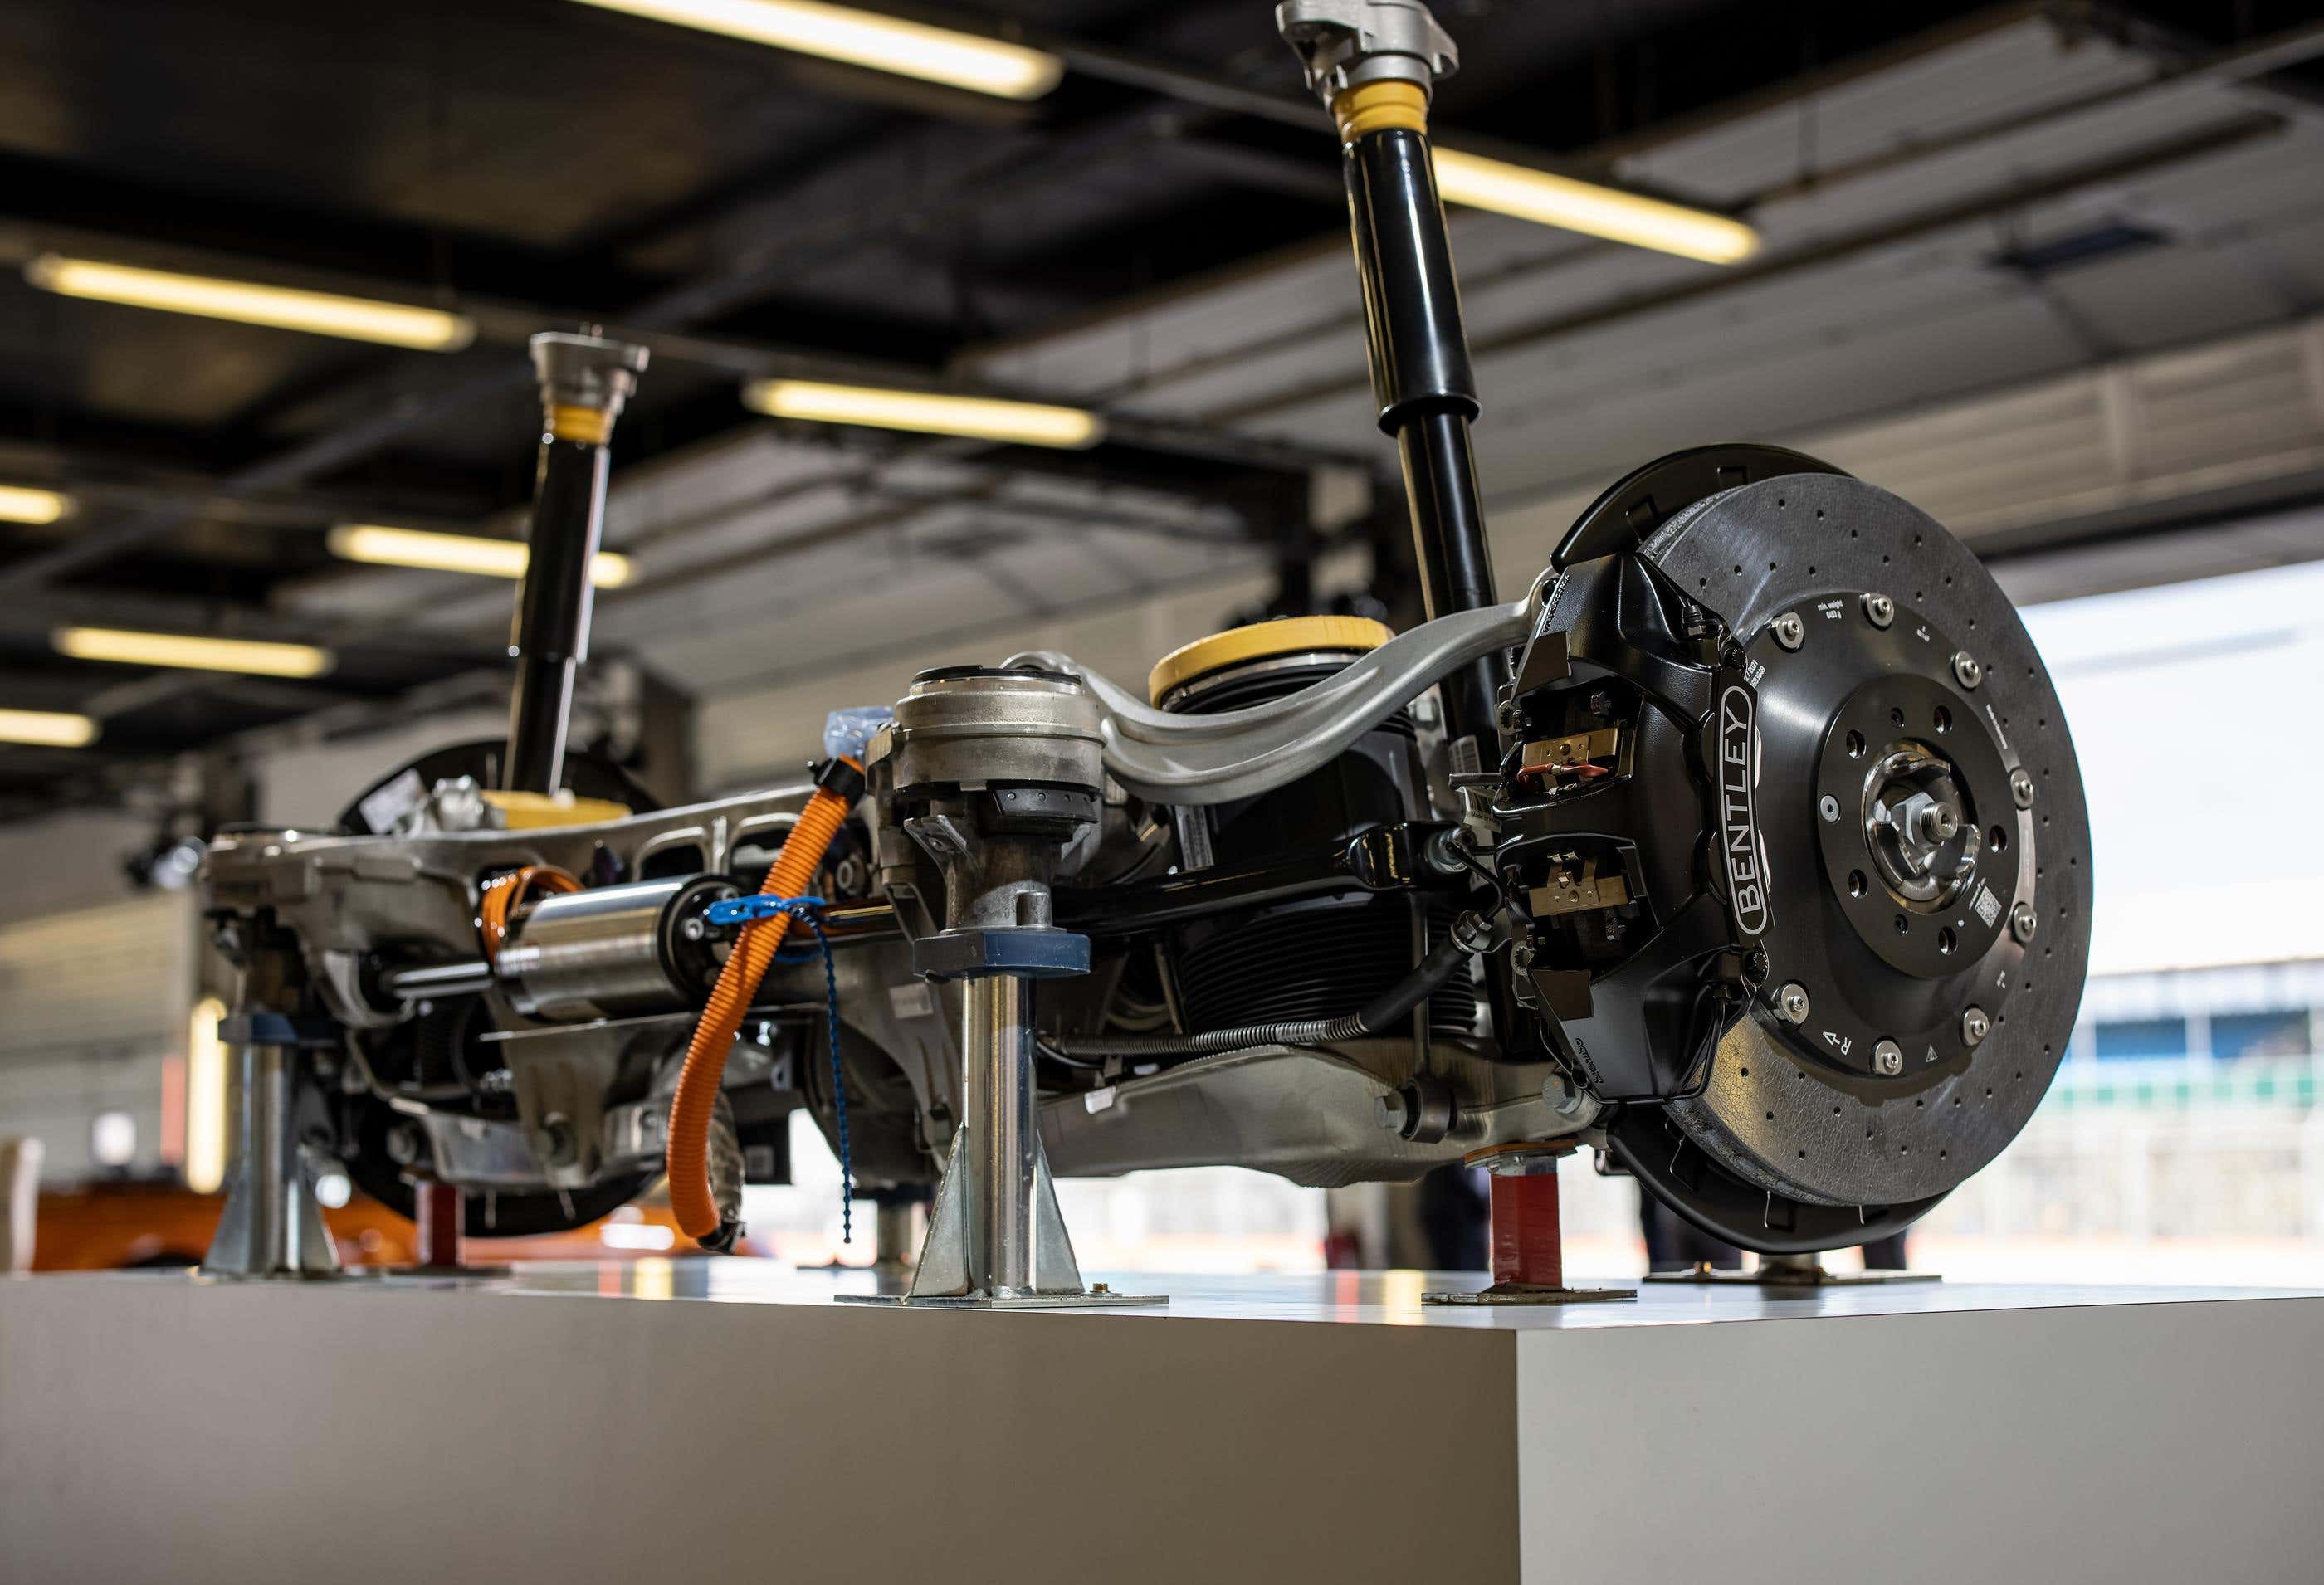 The Bentley Continental GT's rear axle